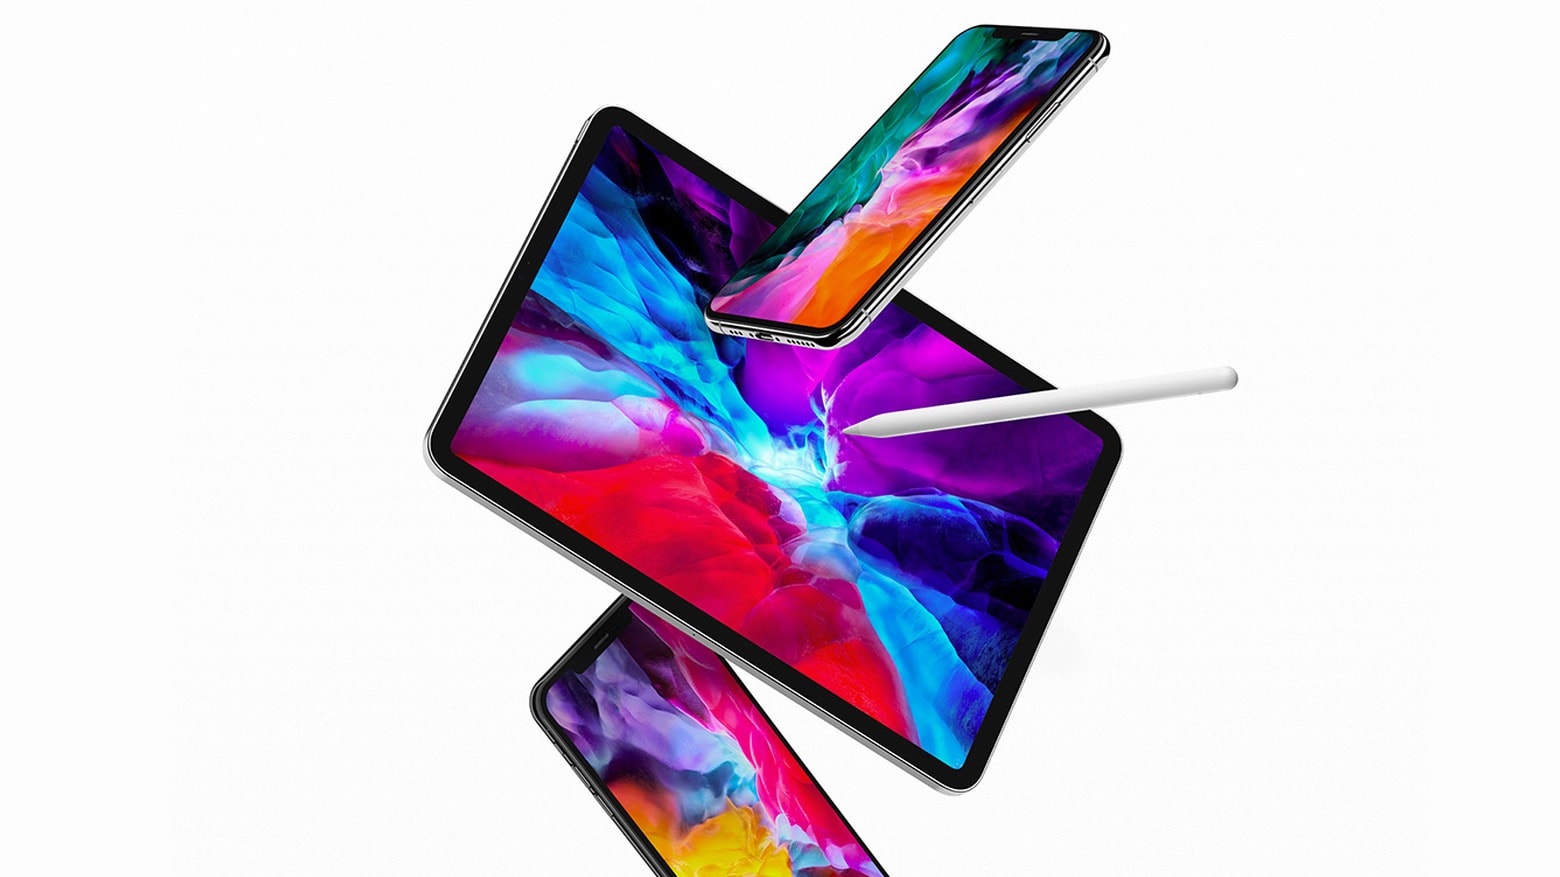 Grab the beautiful 2020 iPad Pro wallpapers now Cult of Mac 1560x877